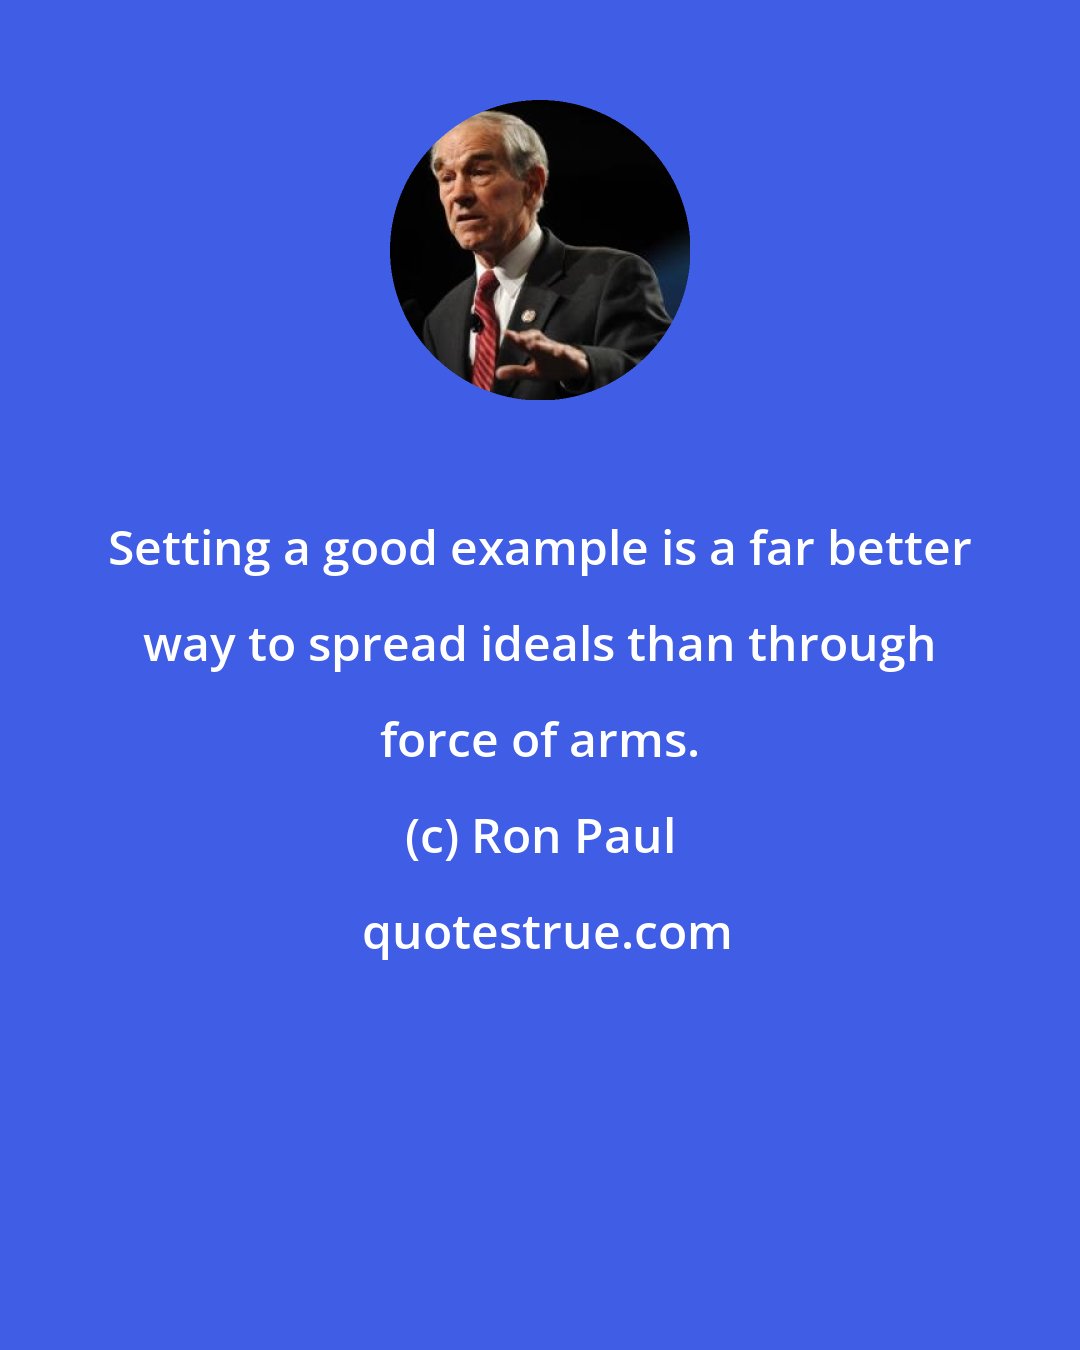 Ron Paul: Setting a good example is a far better way to spread ideals than through force of arms.